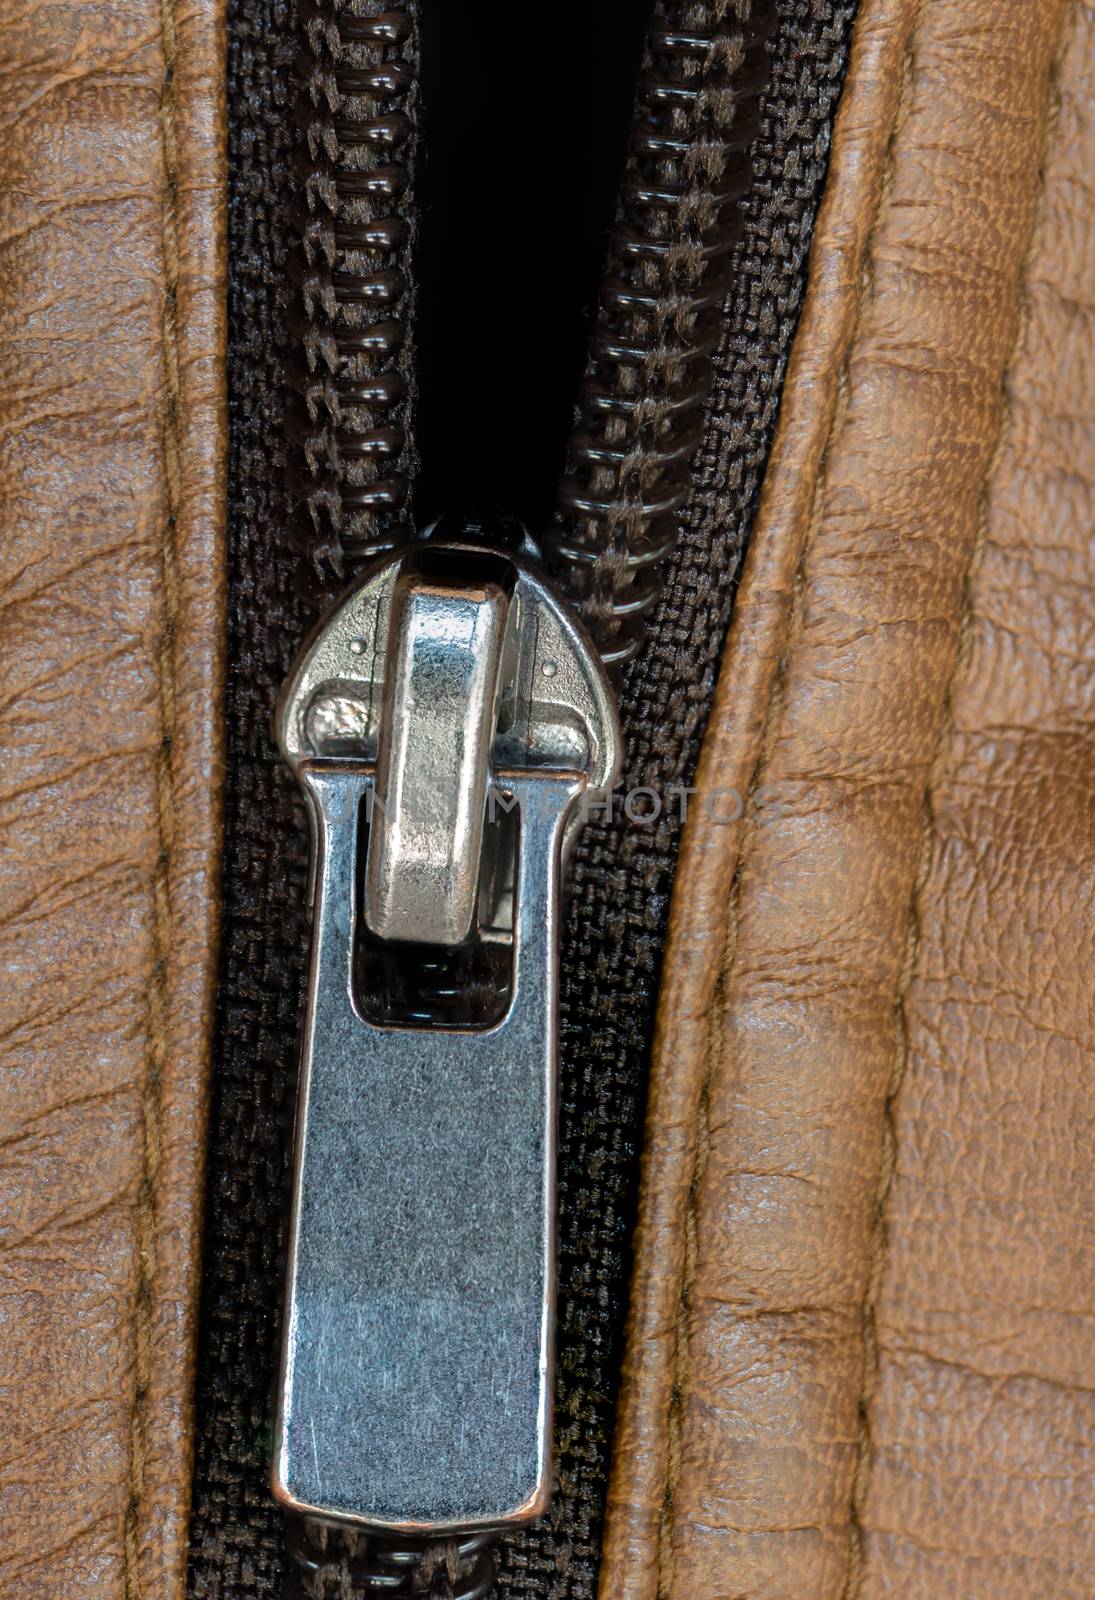 A macro shot of a zipper on a brown leather jacket.